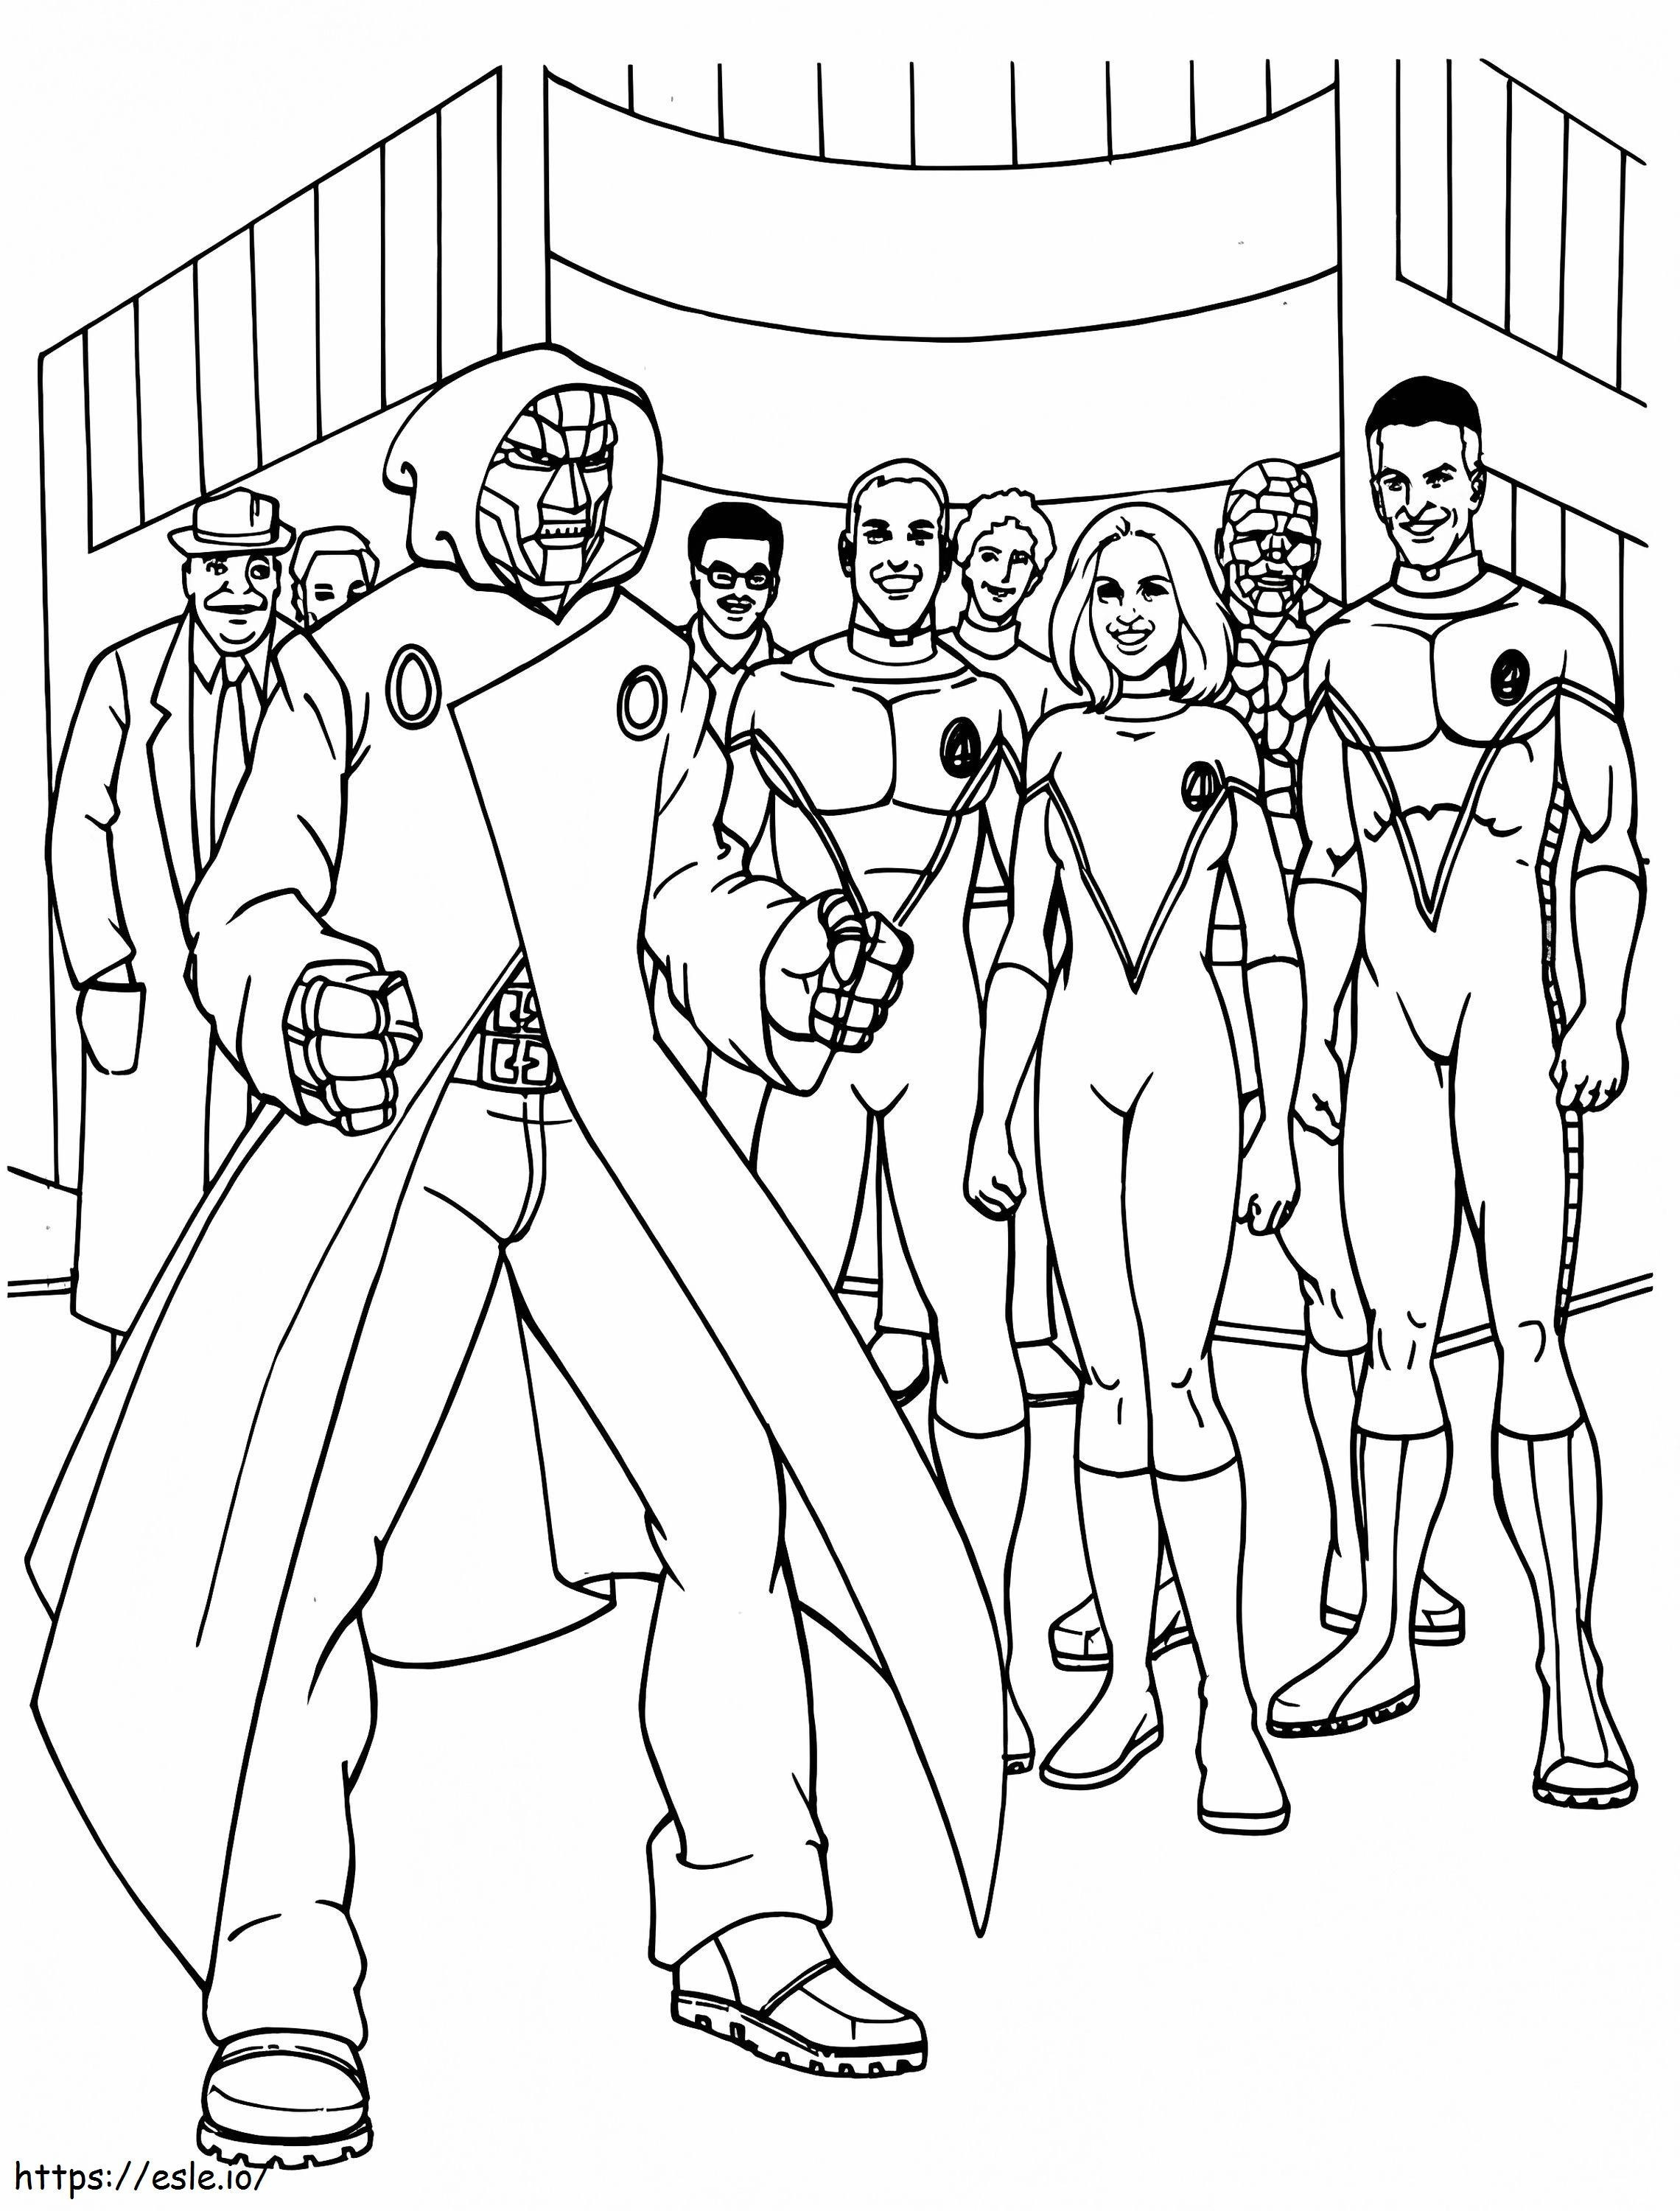 1598573618 22 coloring page